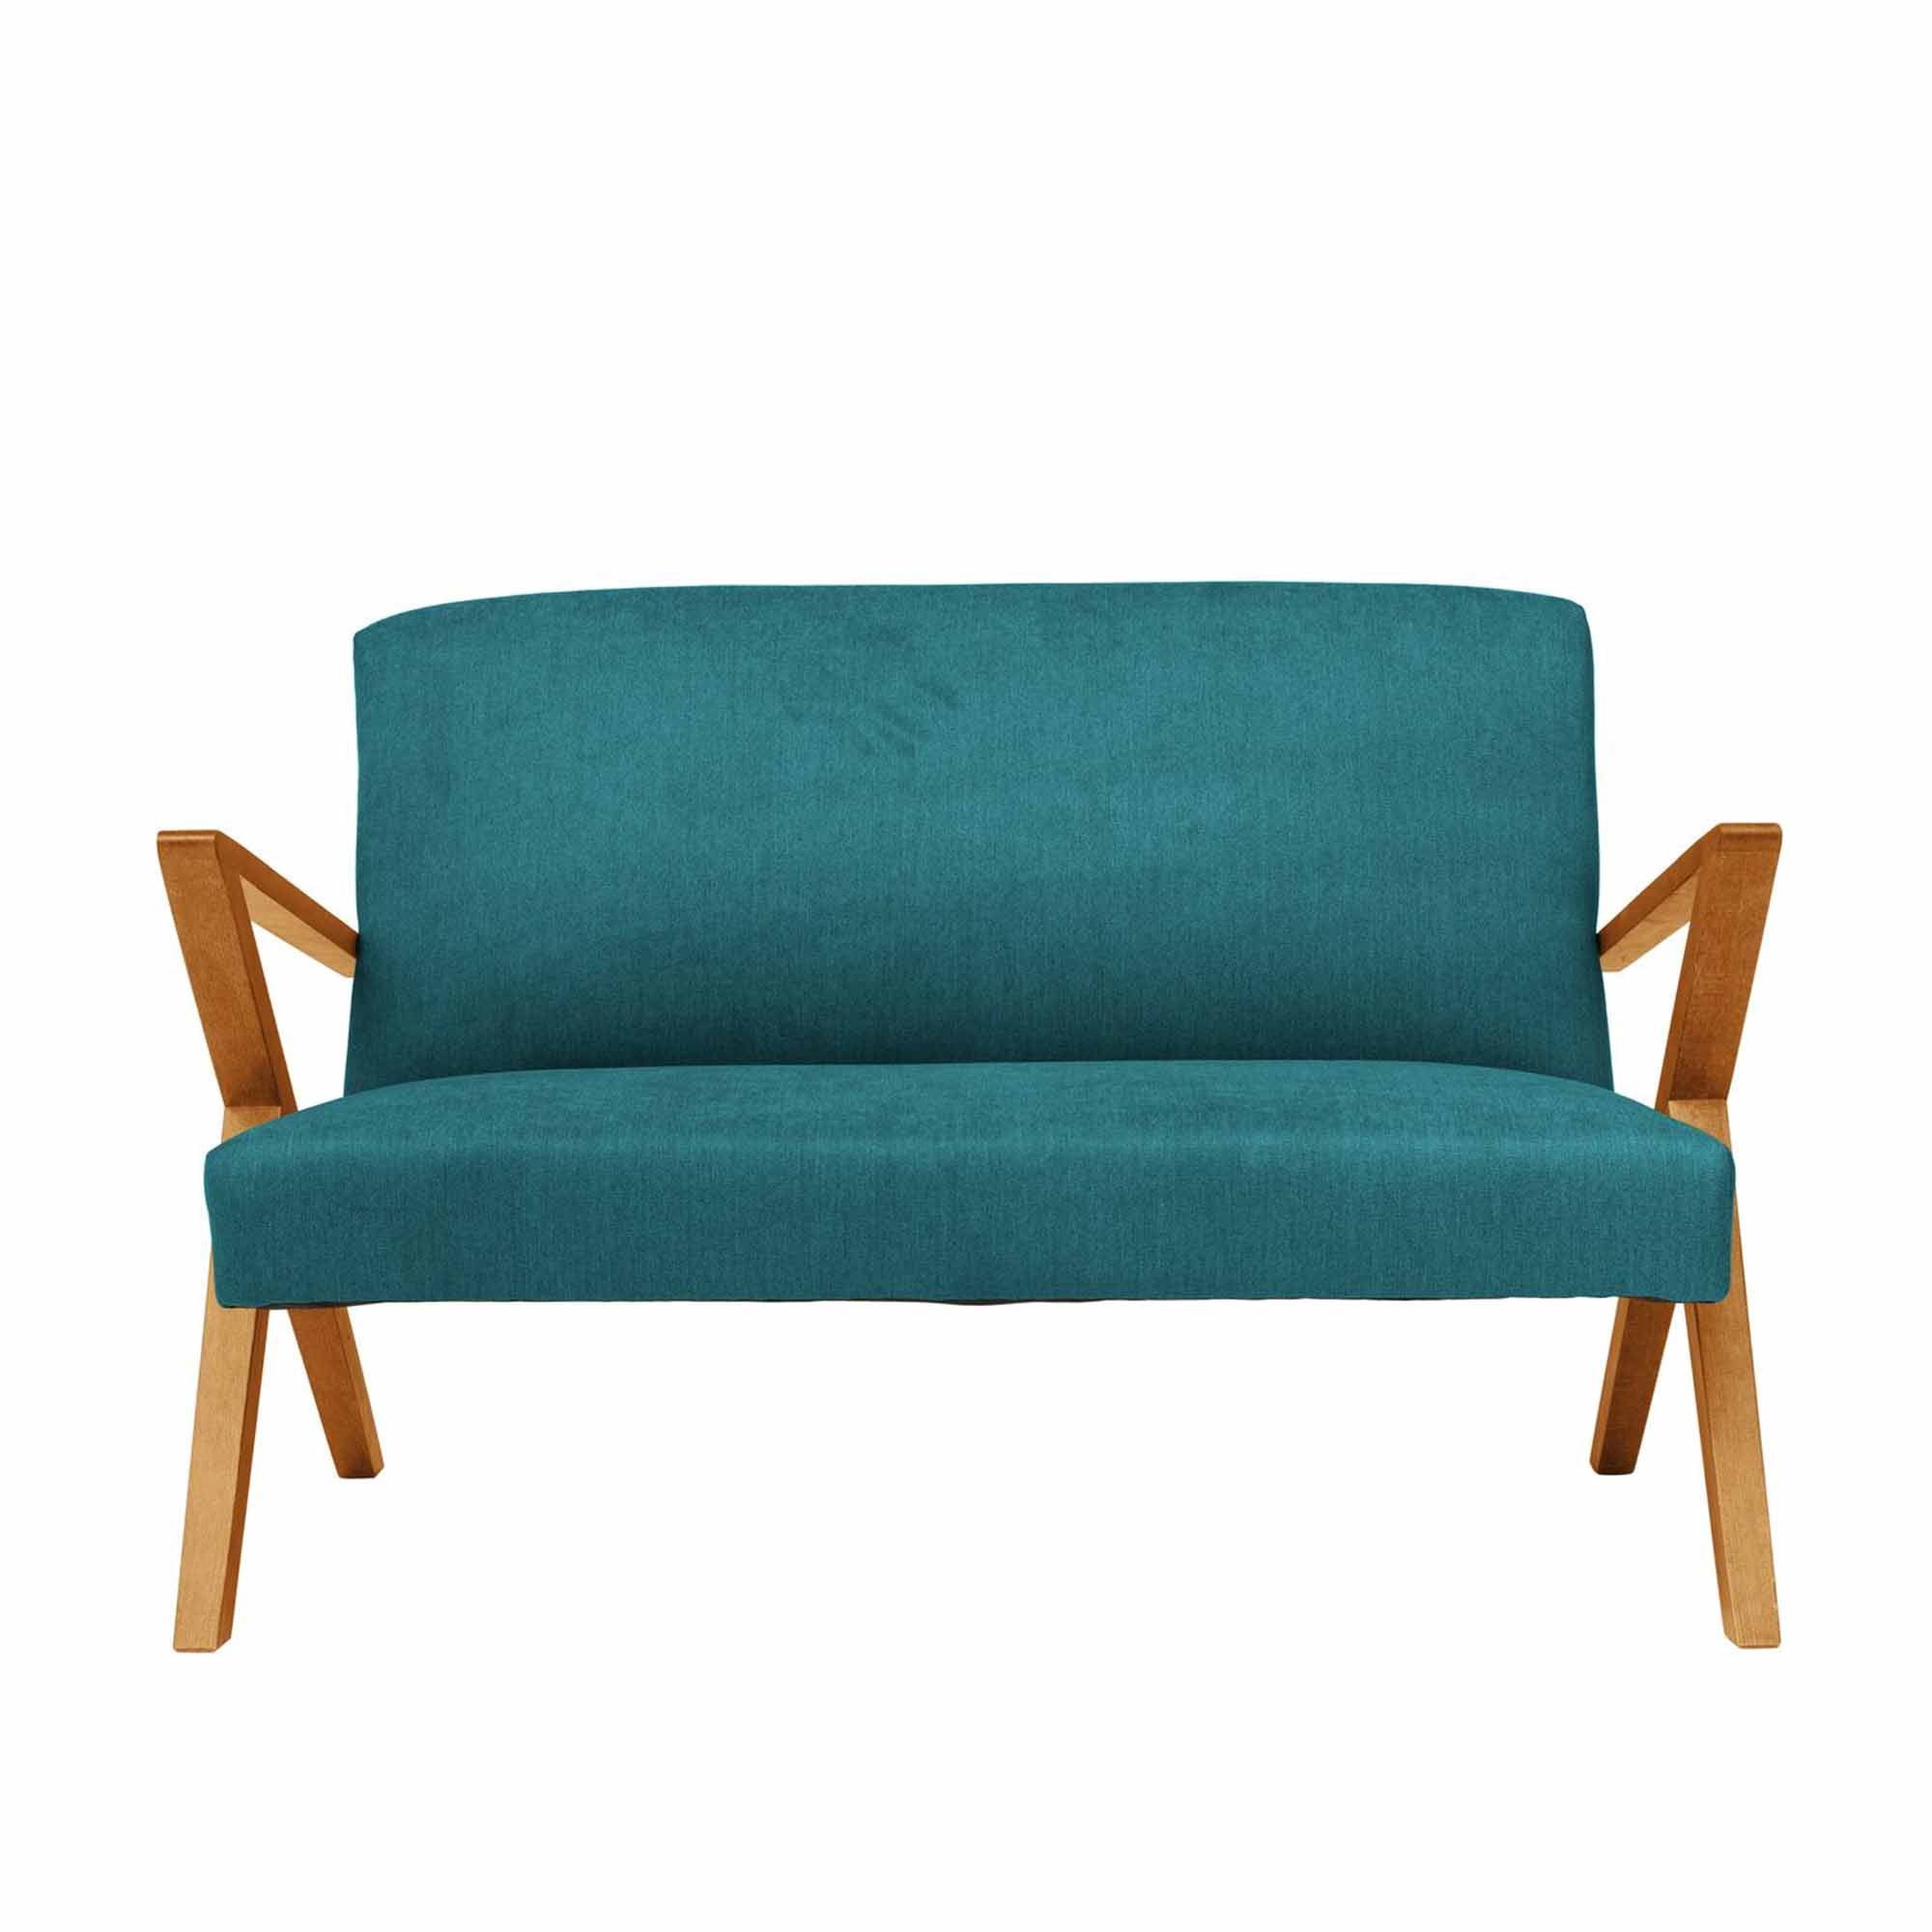 2-Seater Sofa, Beech Wood Frame, Oak Colour blue fabric, front view